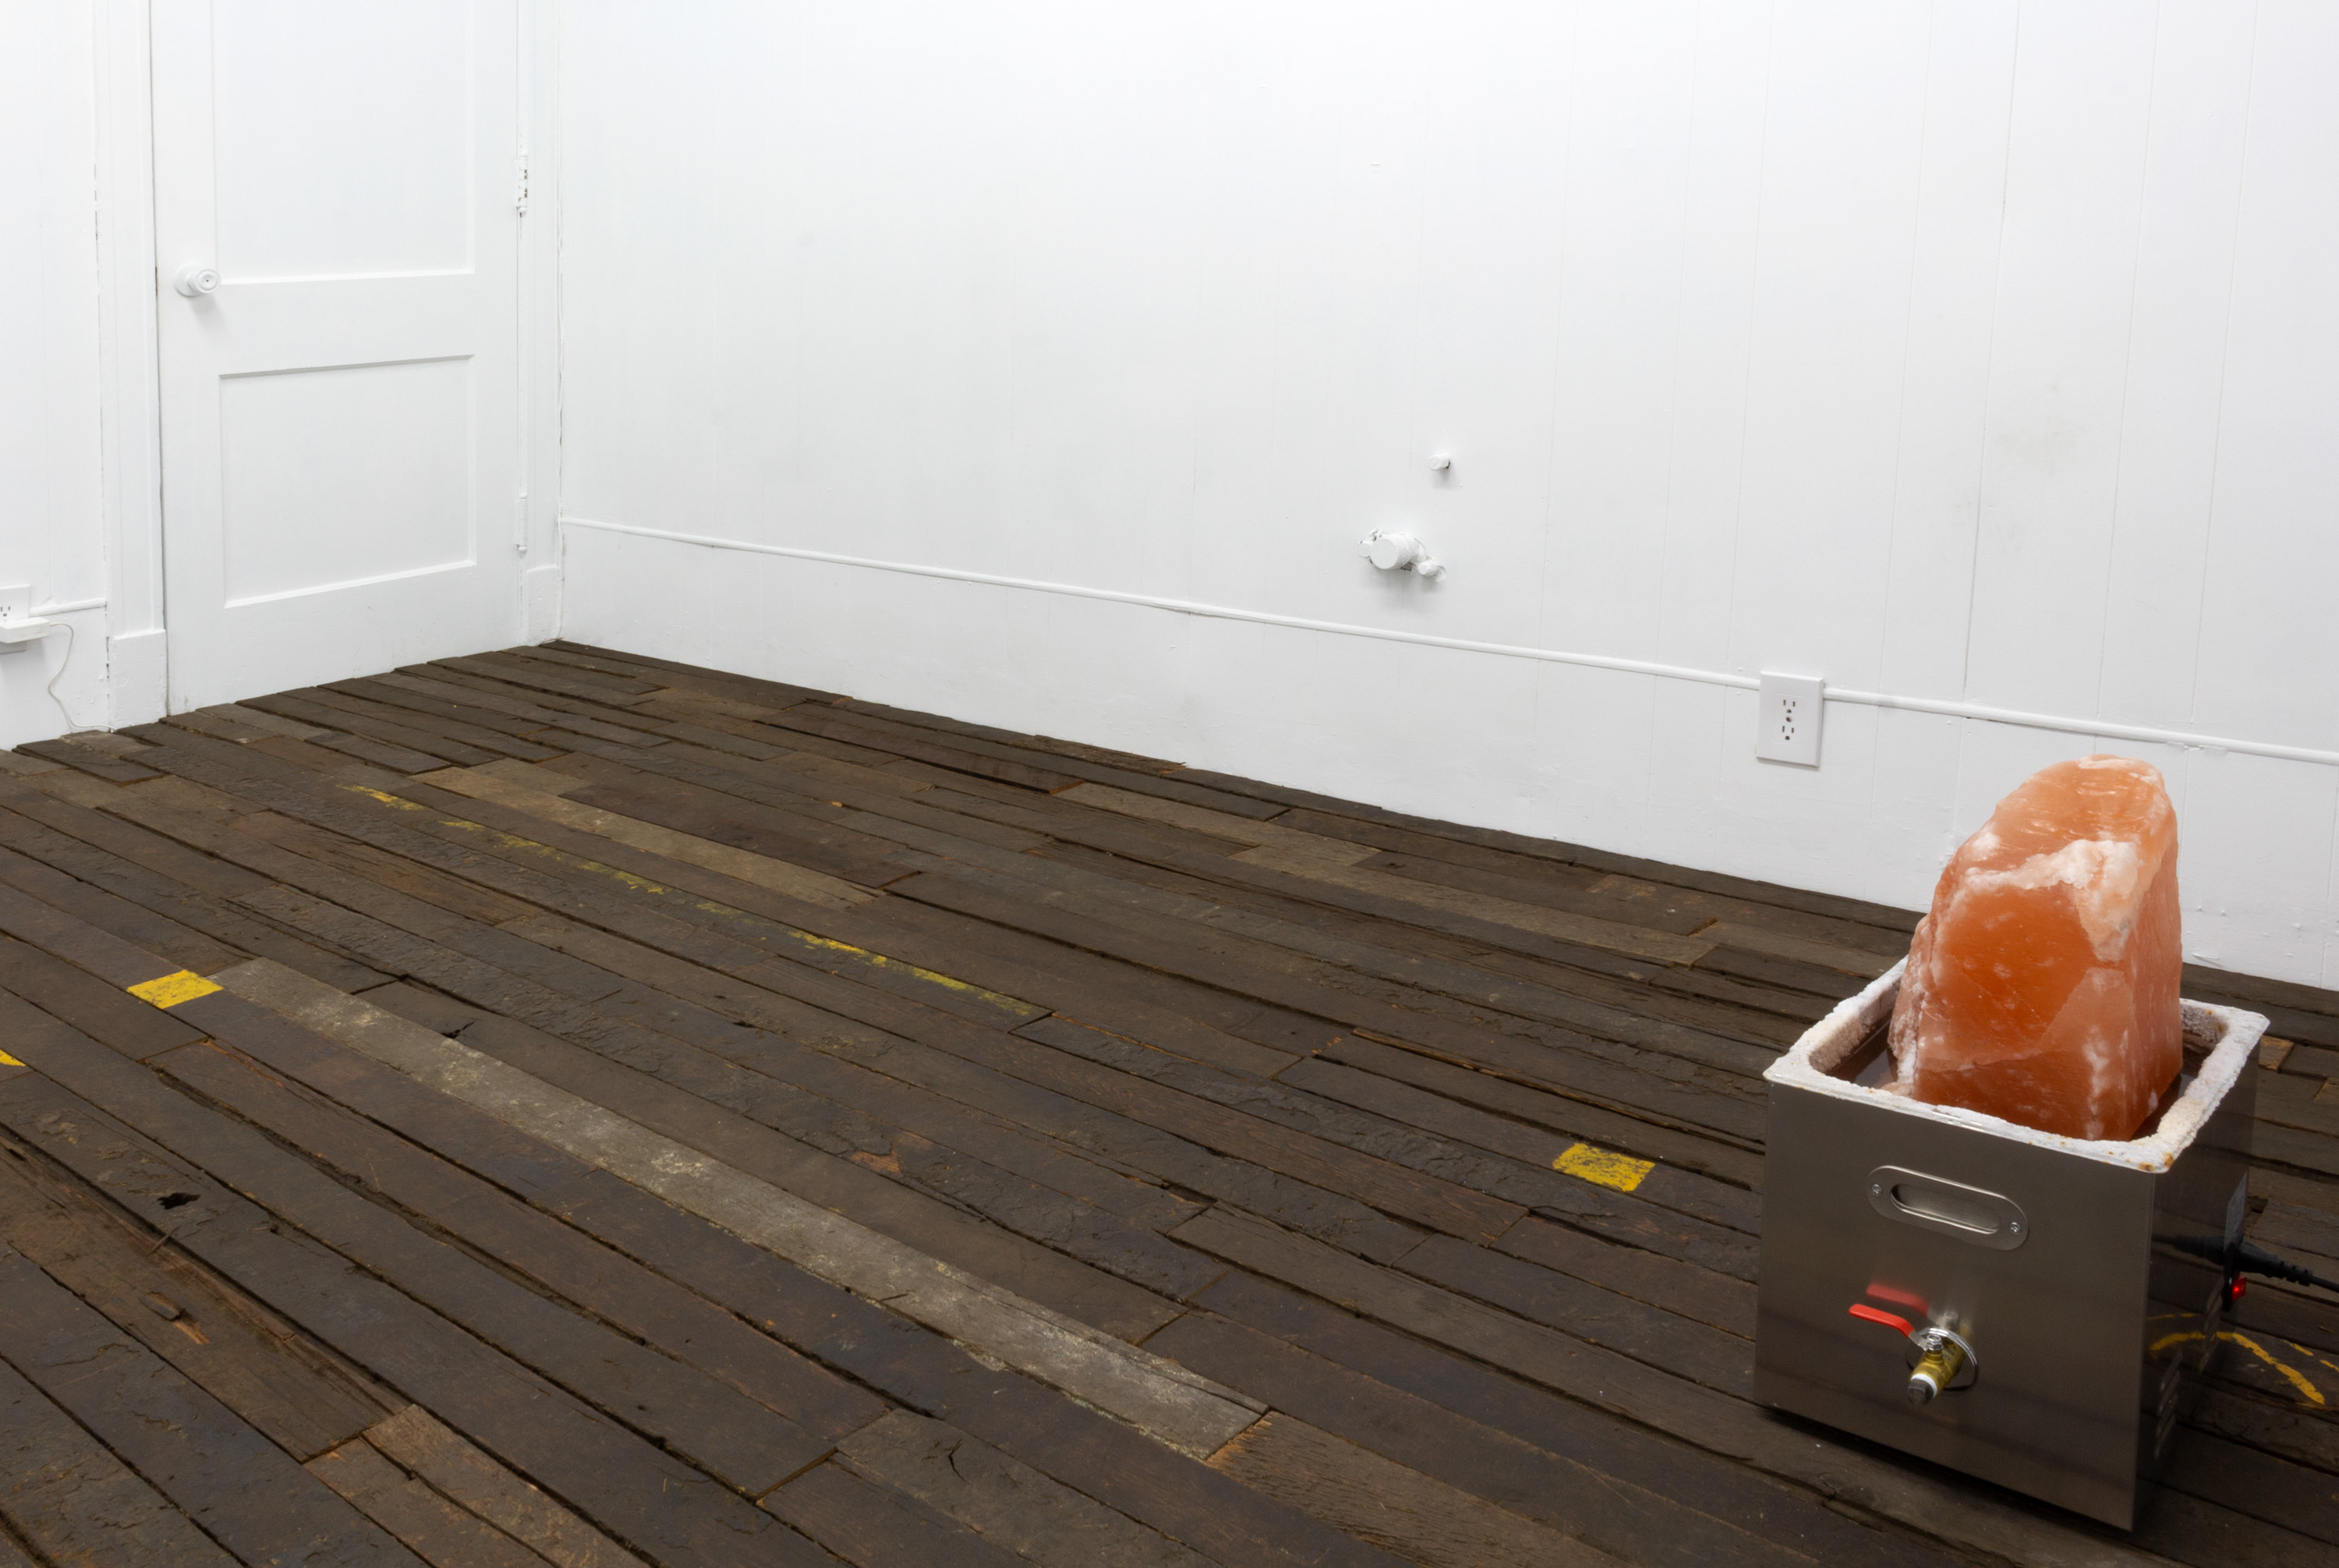 Installation view / Graham Wiebe, Cosplay, 2022, Salvaged coffin factory flooring, Dimensions variable